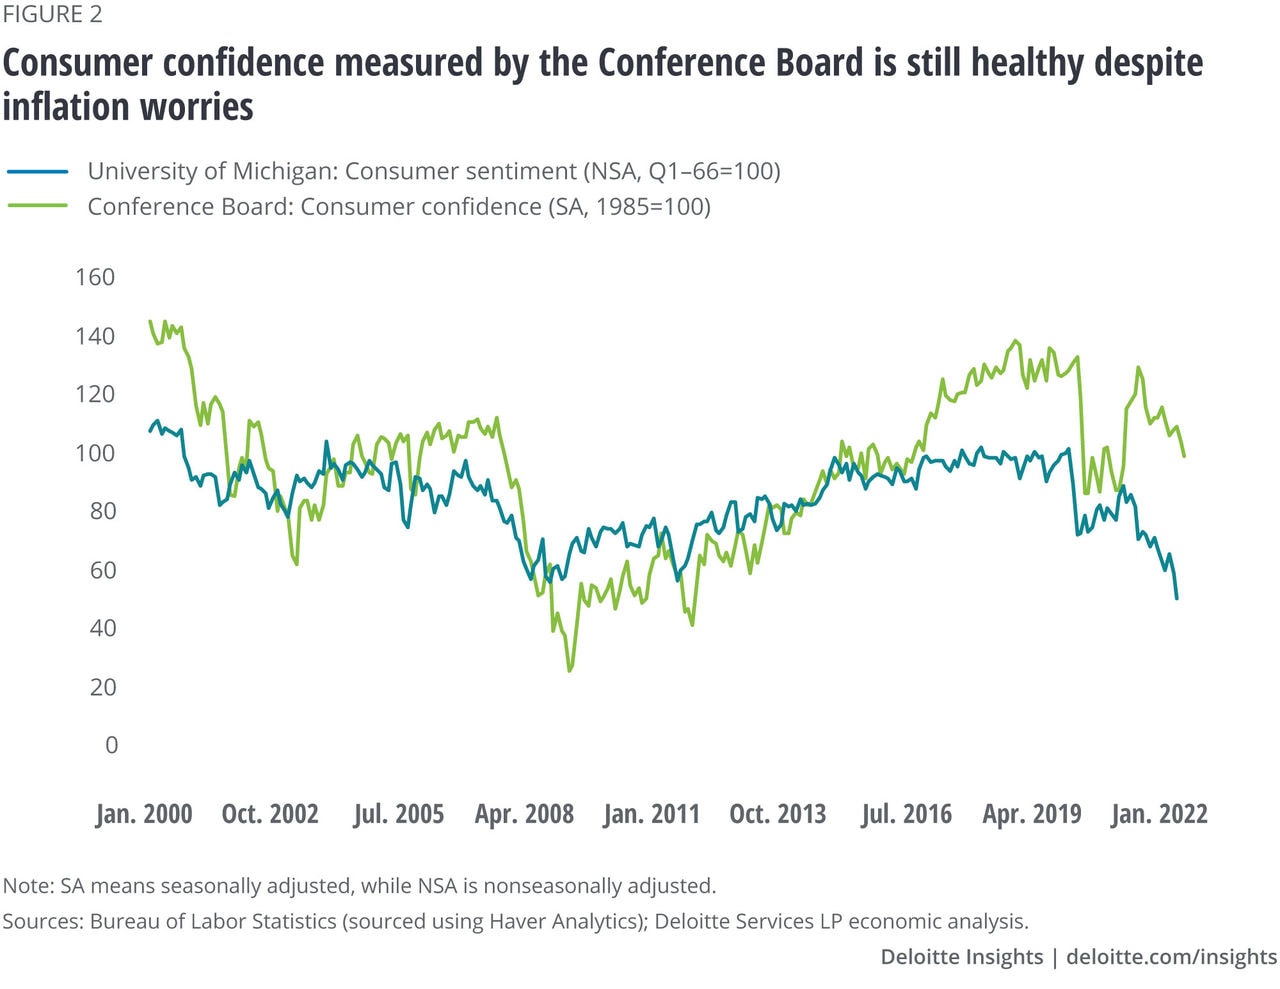 Figure 2. Consumer confidence measured by the Conference Board is still healthy despite inflation worries